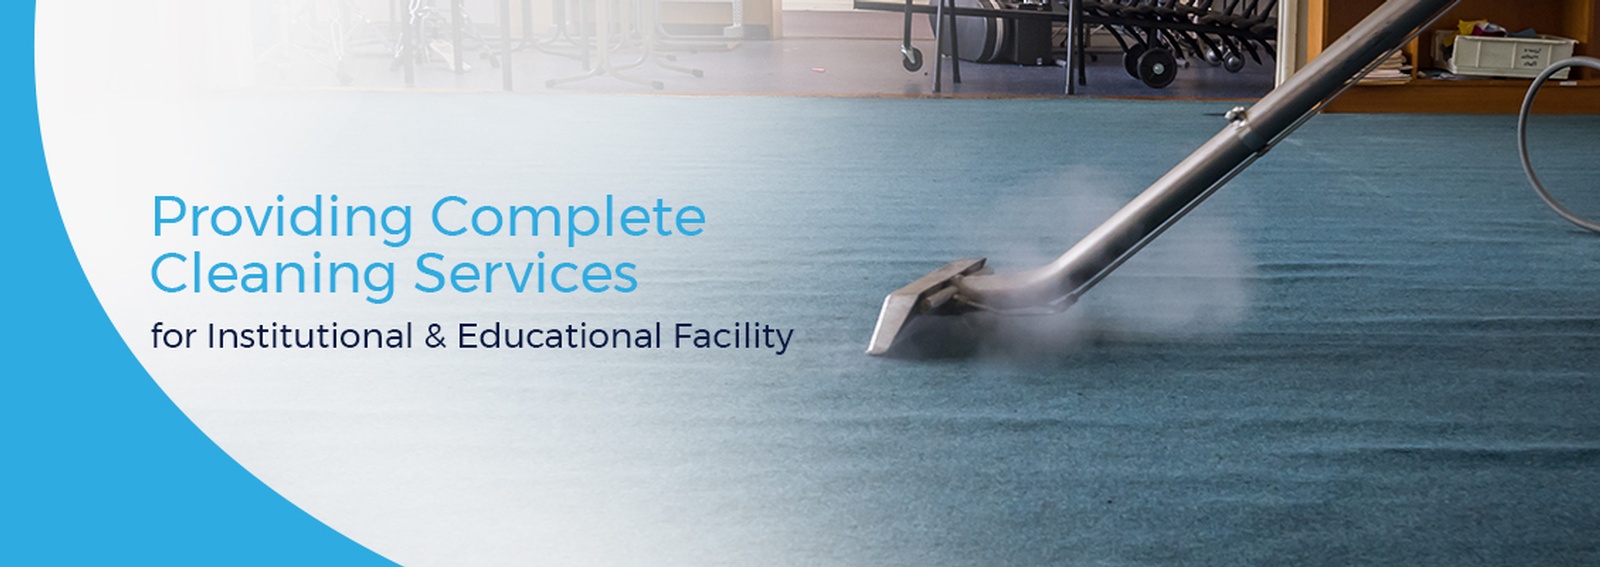 Institutional & Educational Facility Cleaning Services in Hamilton, Ontario